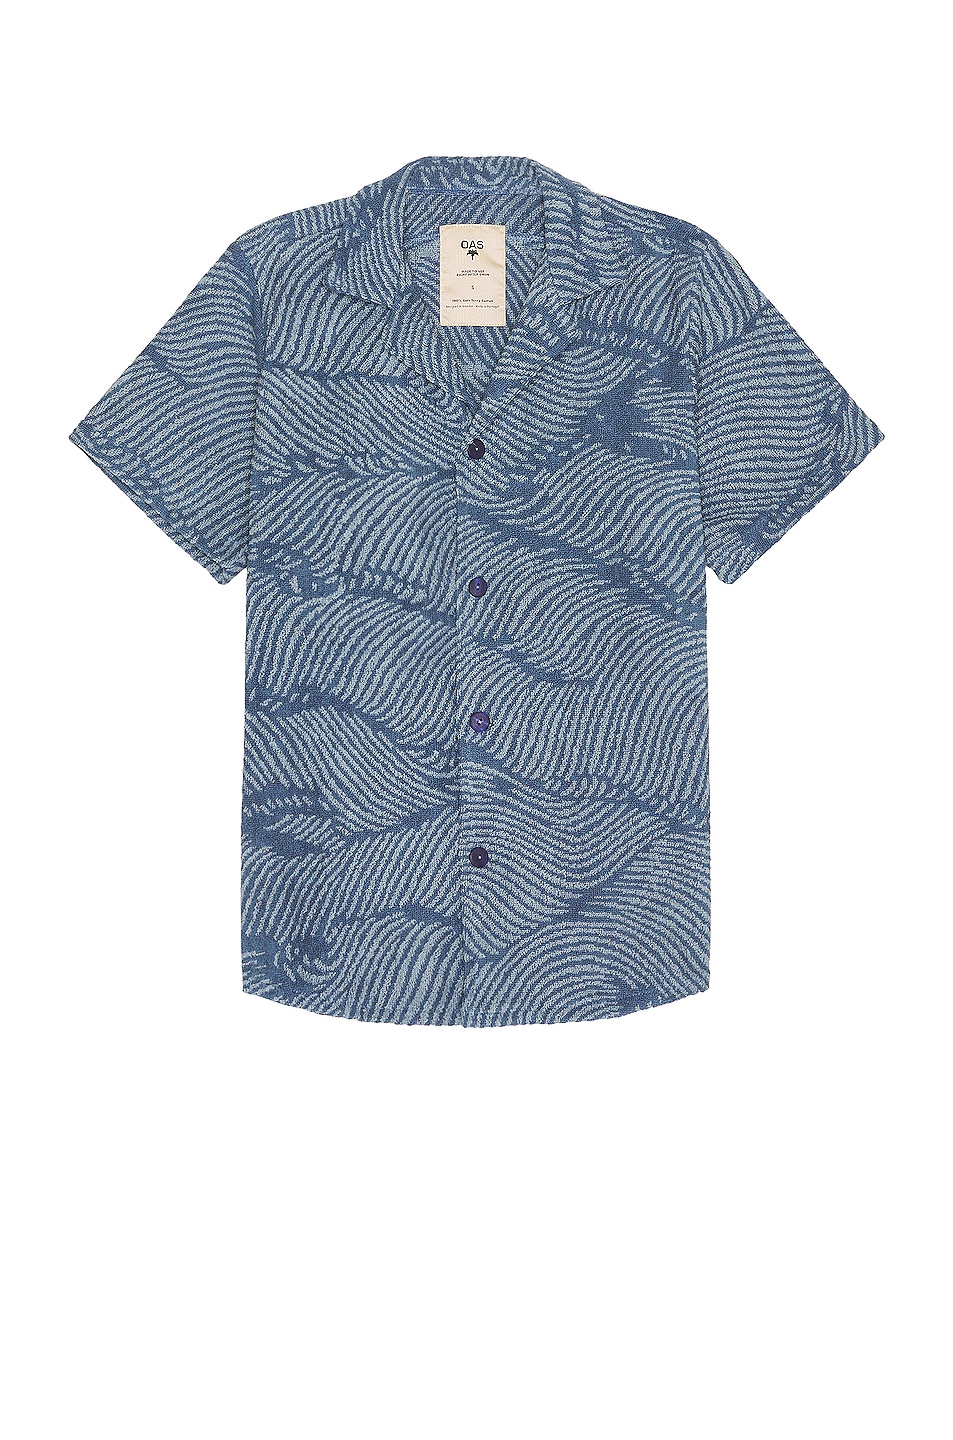 Image 1 of OAS Wavy Cuba Terry Shirt in Blue